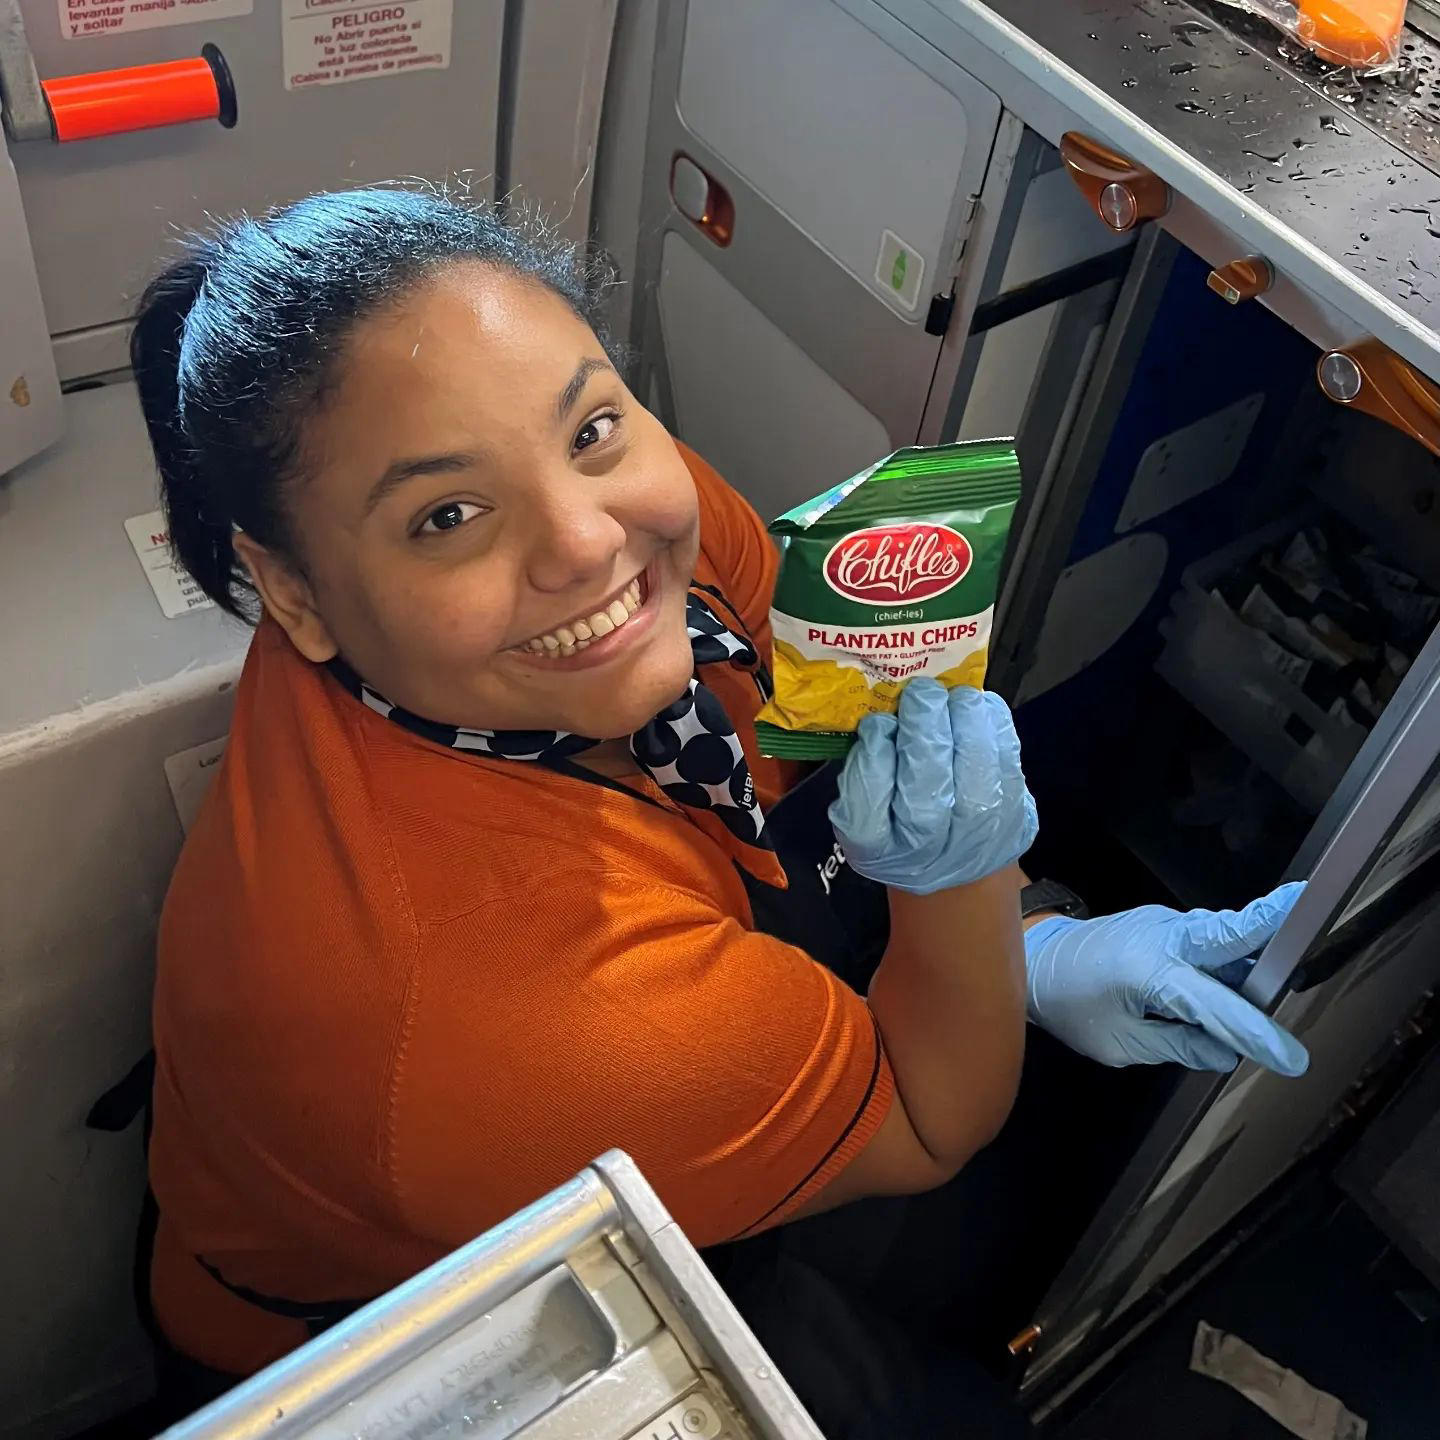 image  1 JetBlue - These chips are plantains